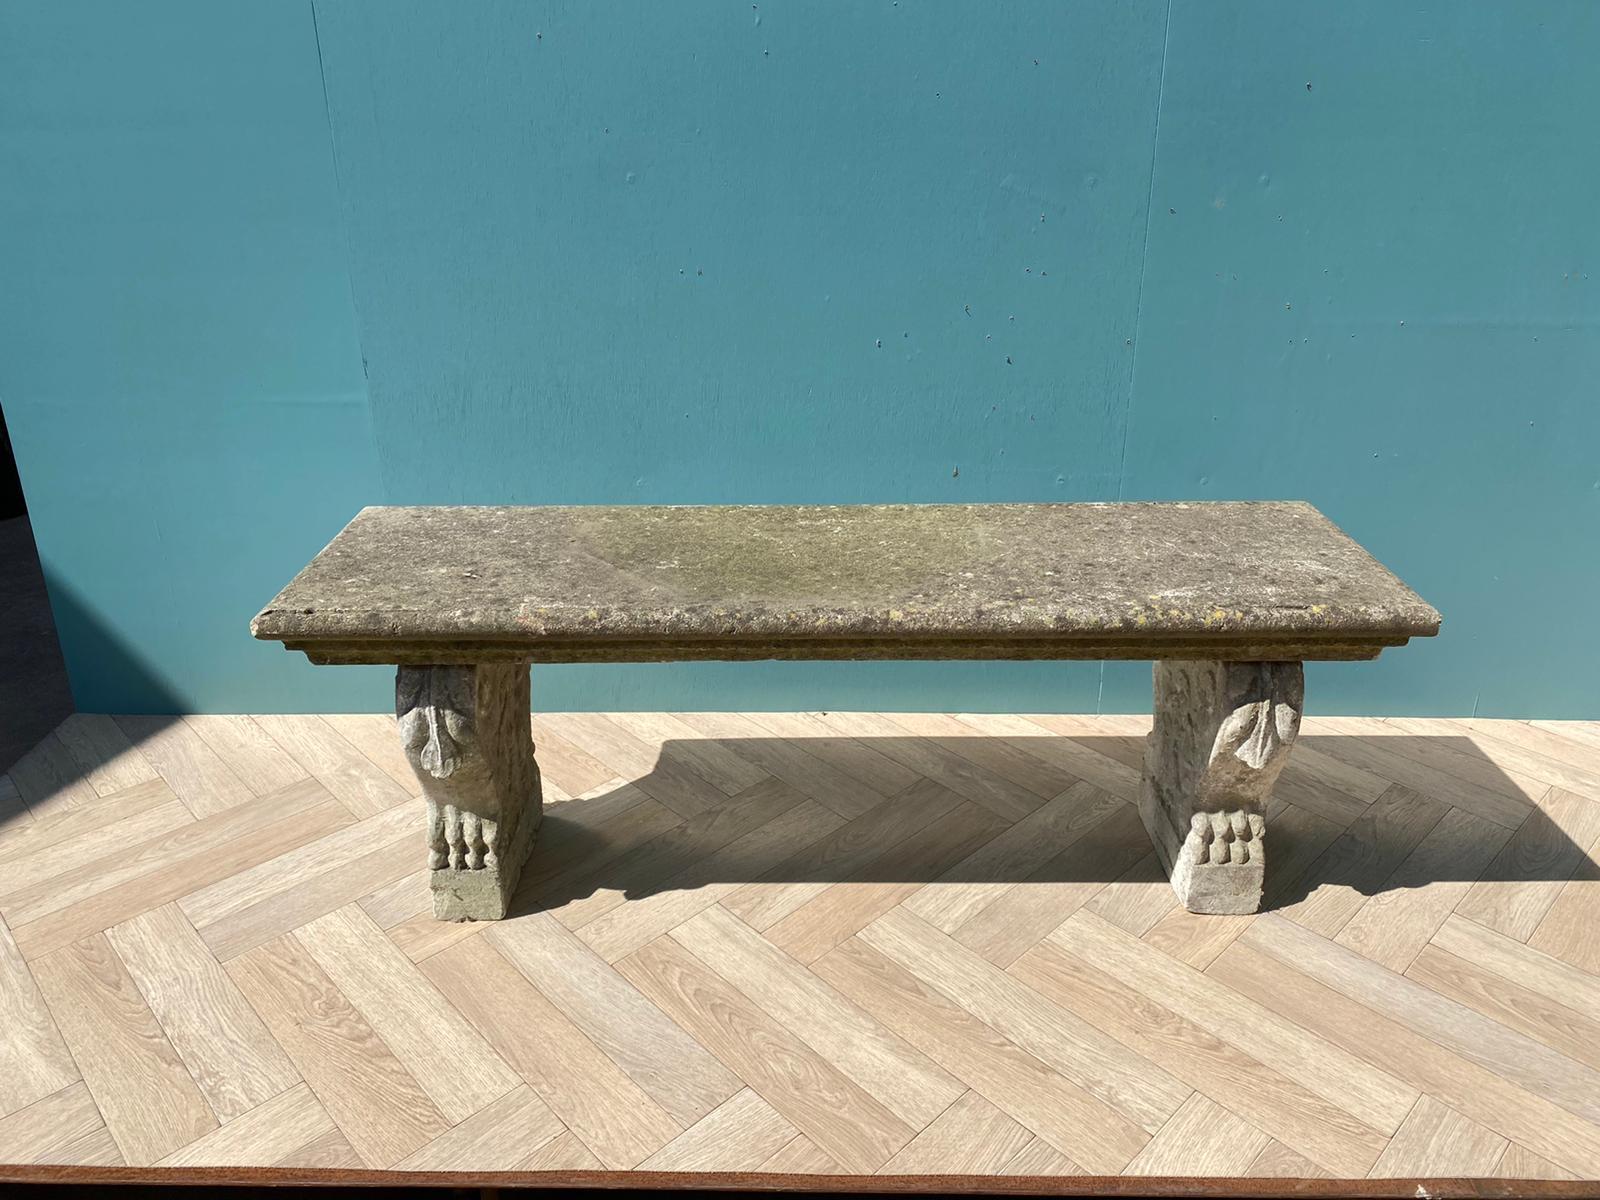 A reclaimed composition stone garden seat or bench.

Condition report

Good structural condition.

Style

Georgian, Neoclassical, Regency, Victorian

Period

19th-20th